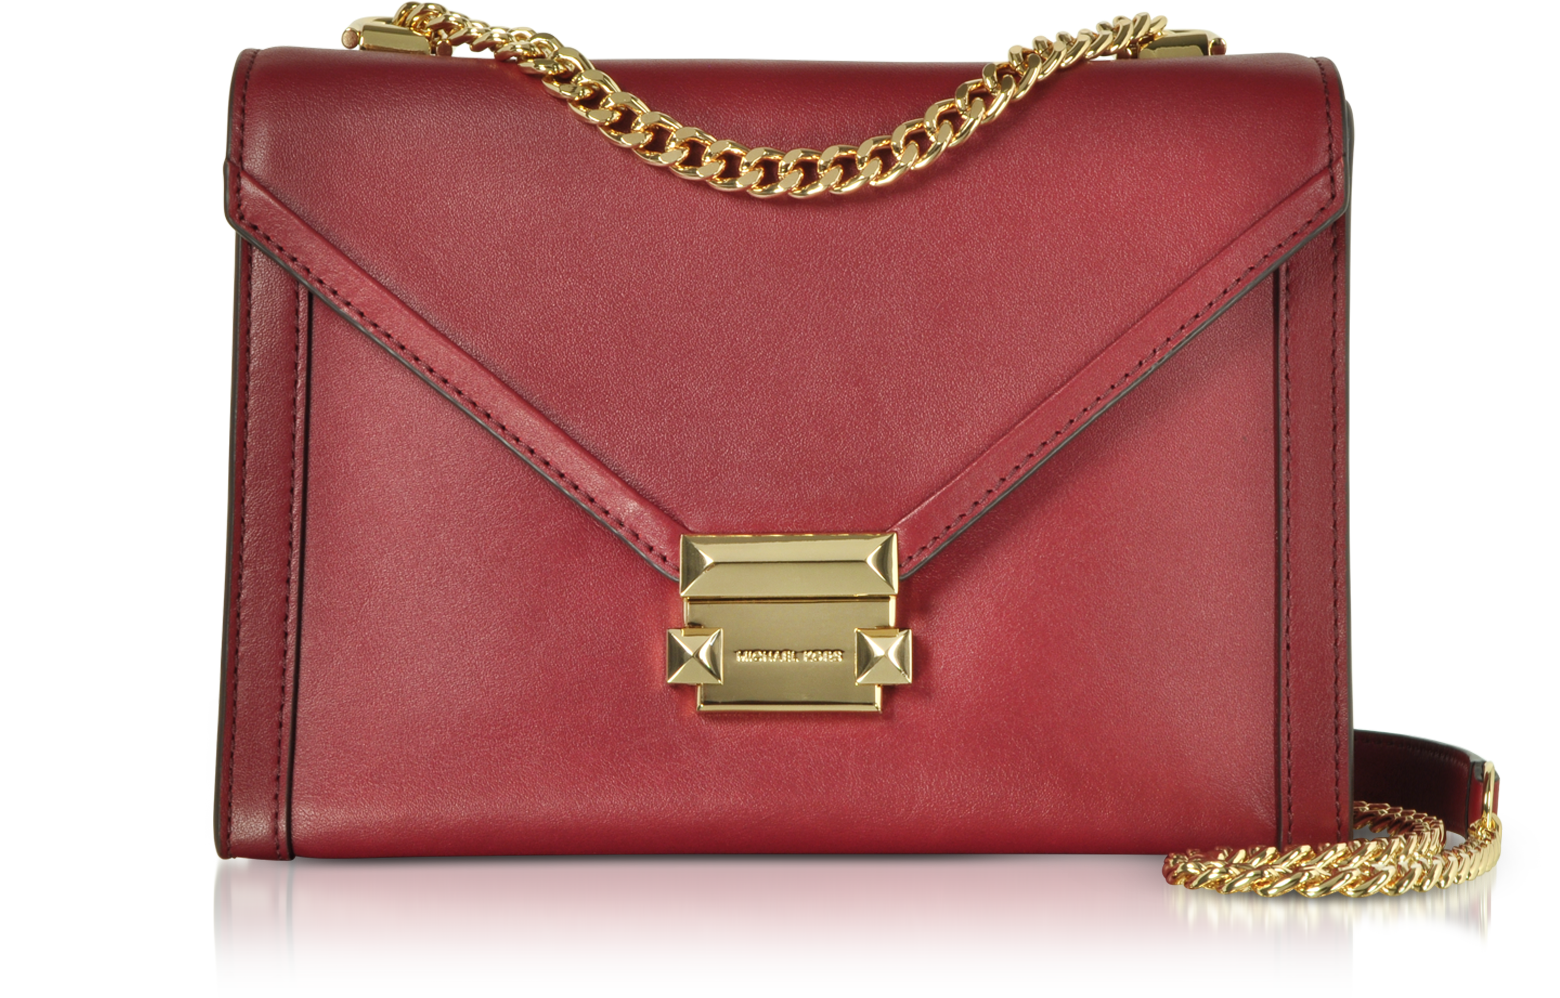 whitney large leather convertible shoulder bag